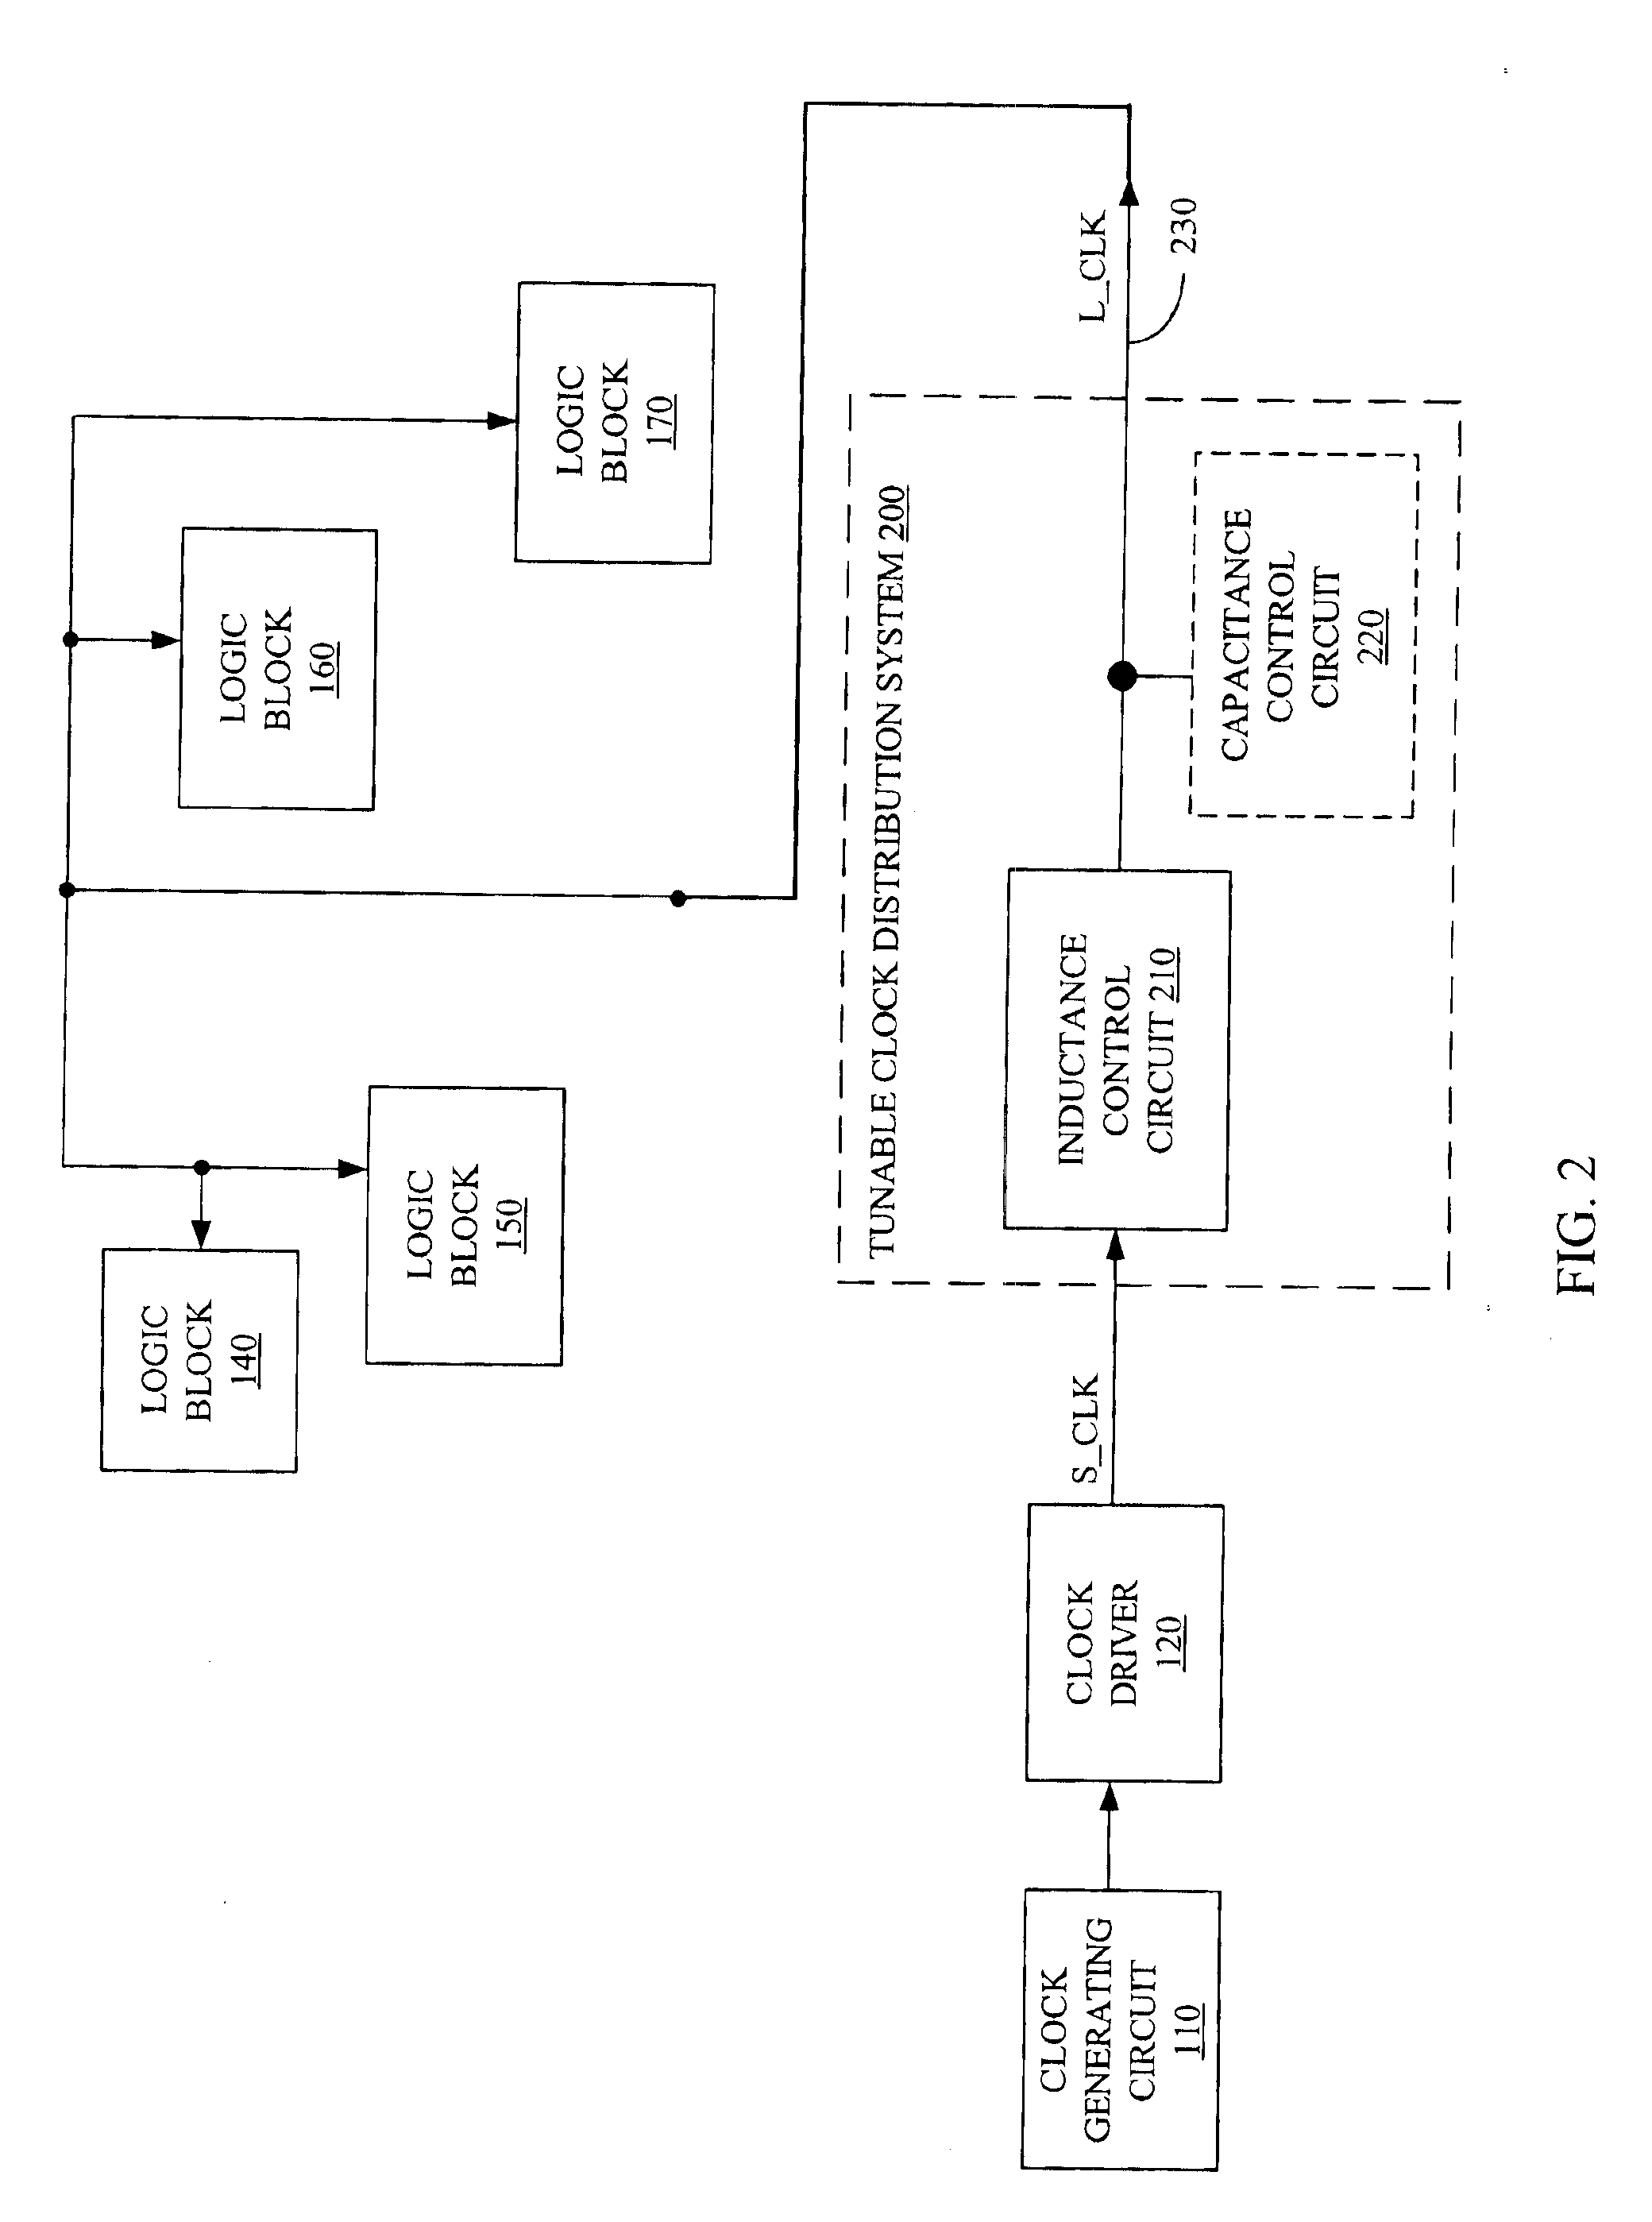 Tunable clock distribution system for reducing power dissipation